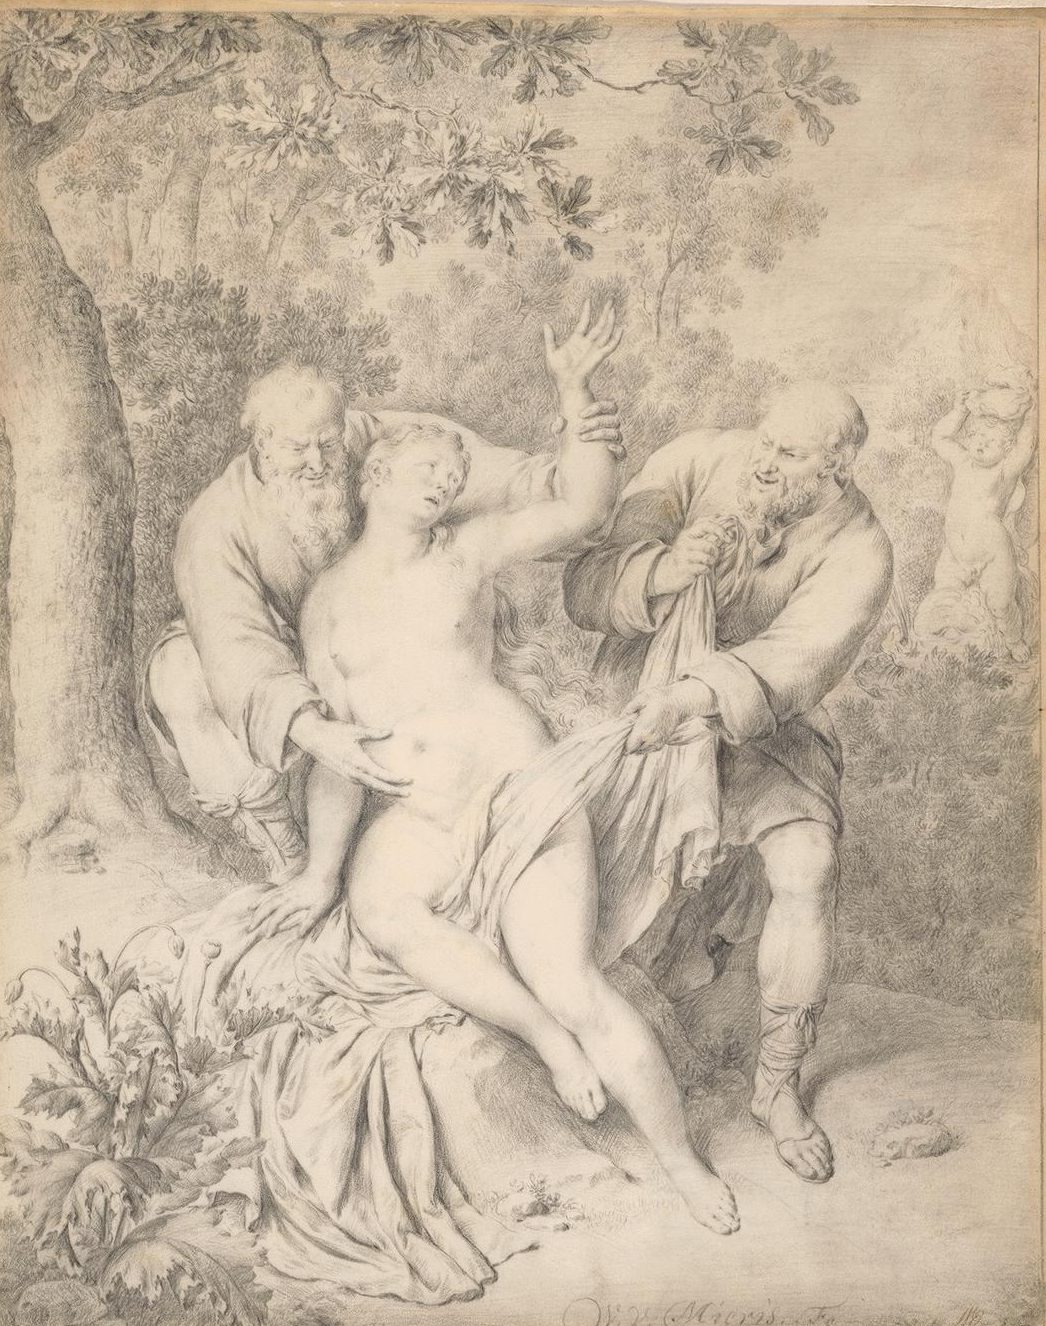 Drawing of Susanna and the Elders